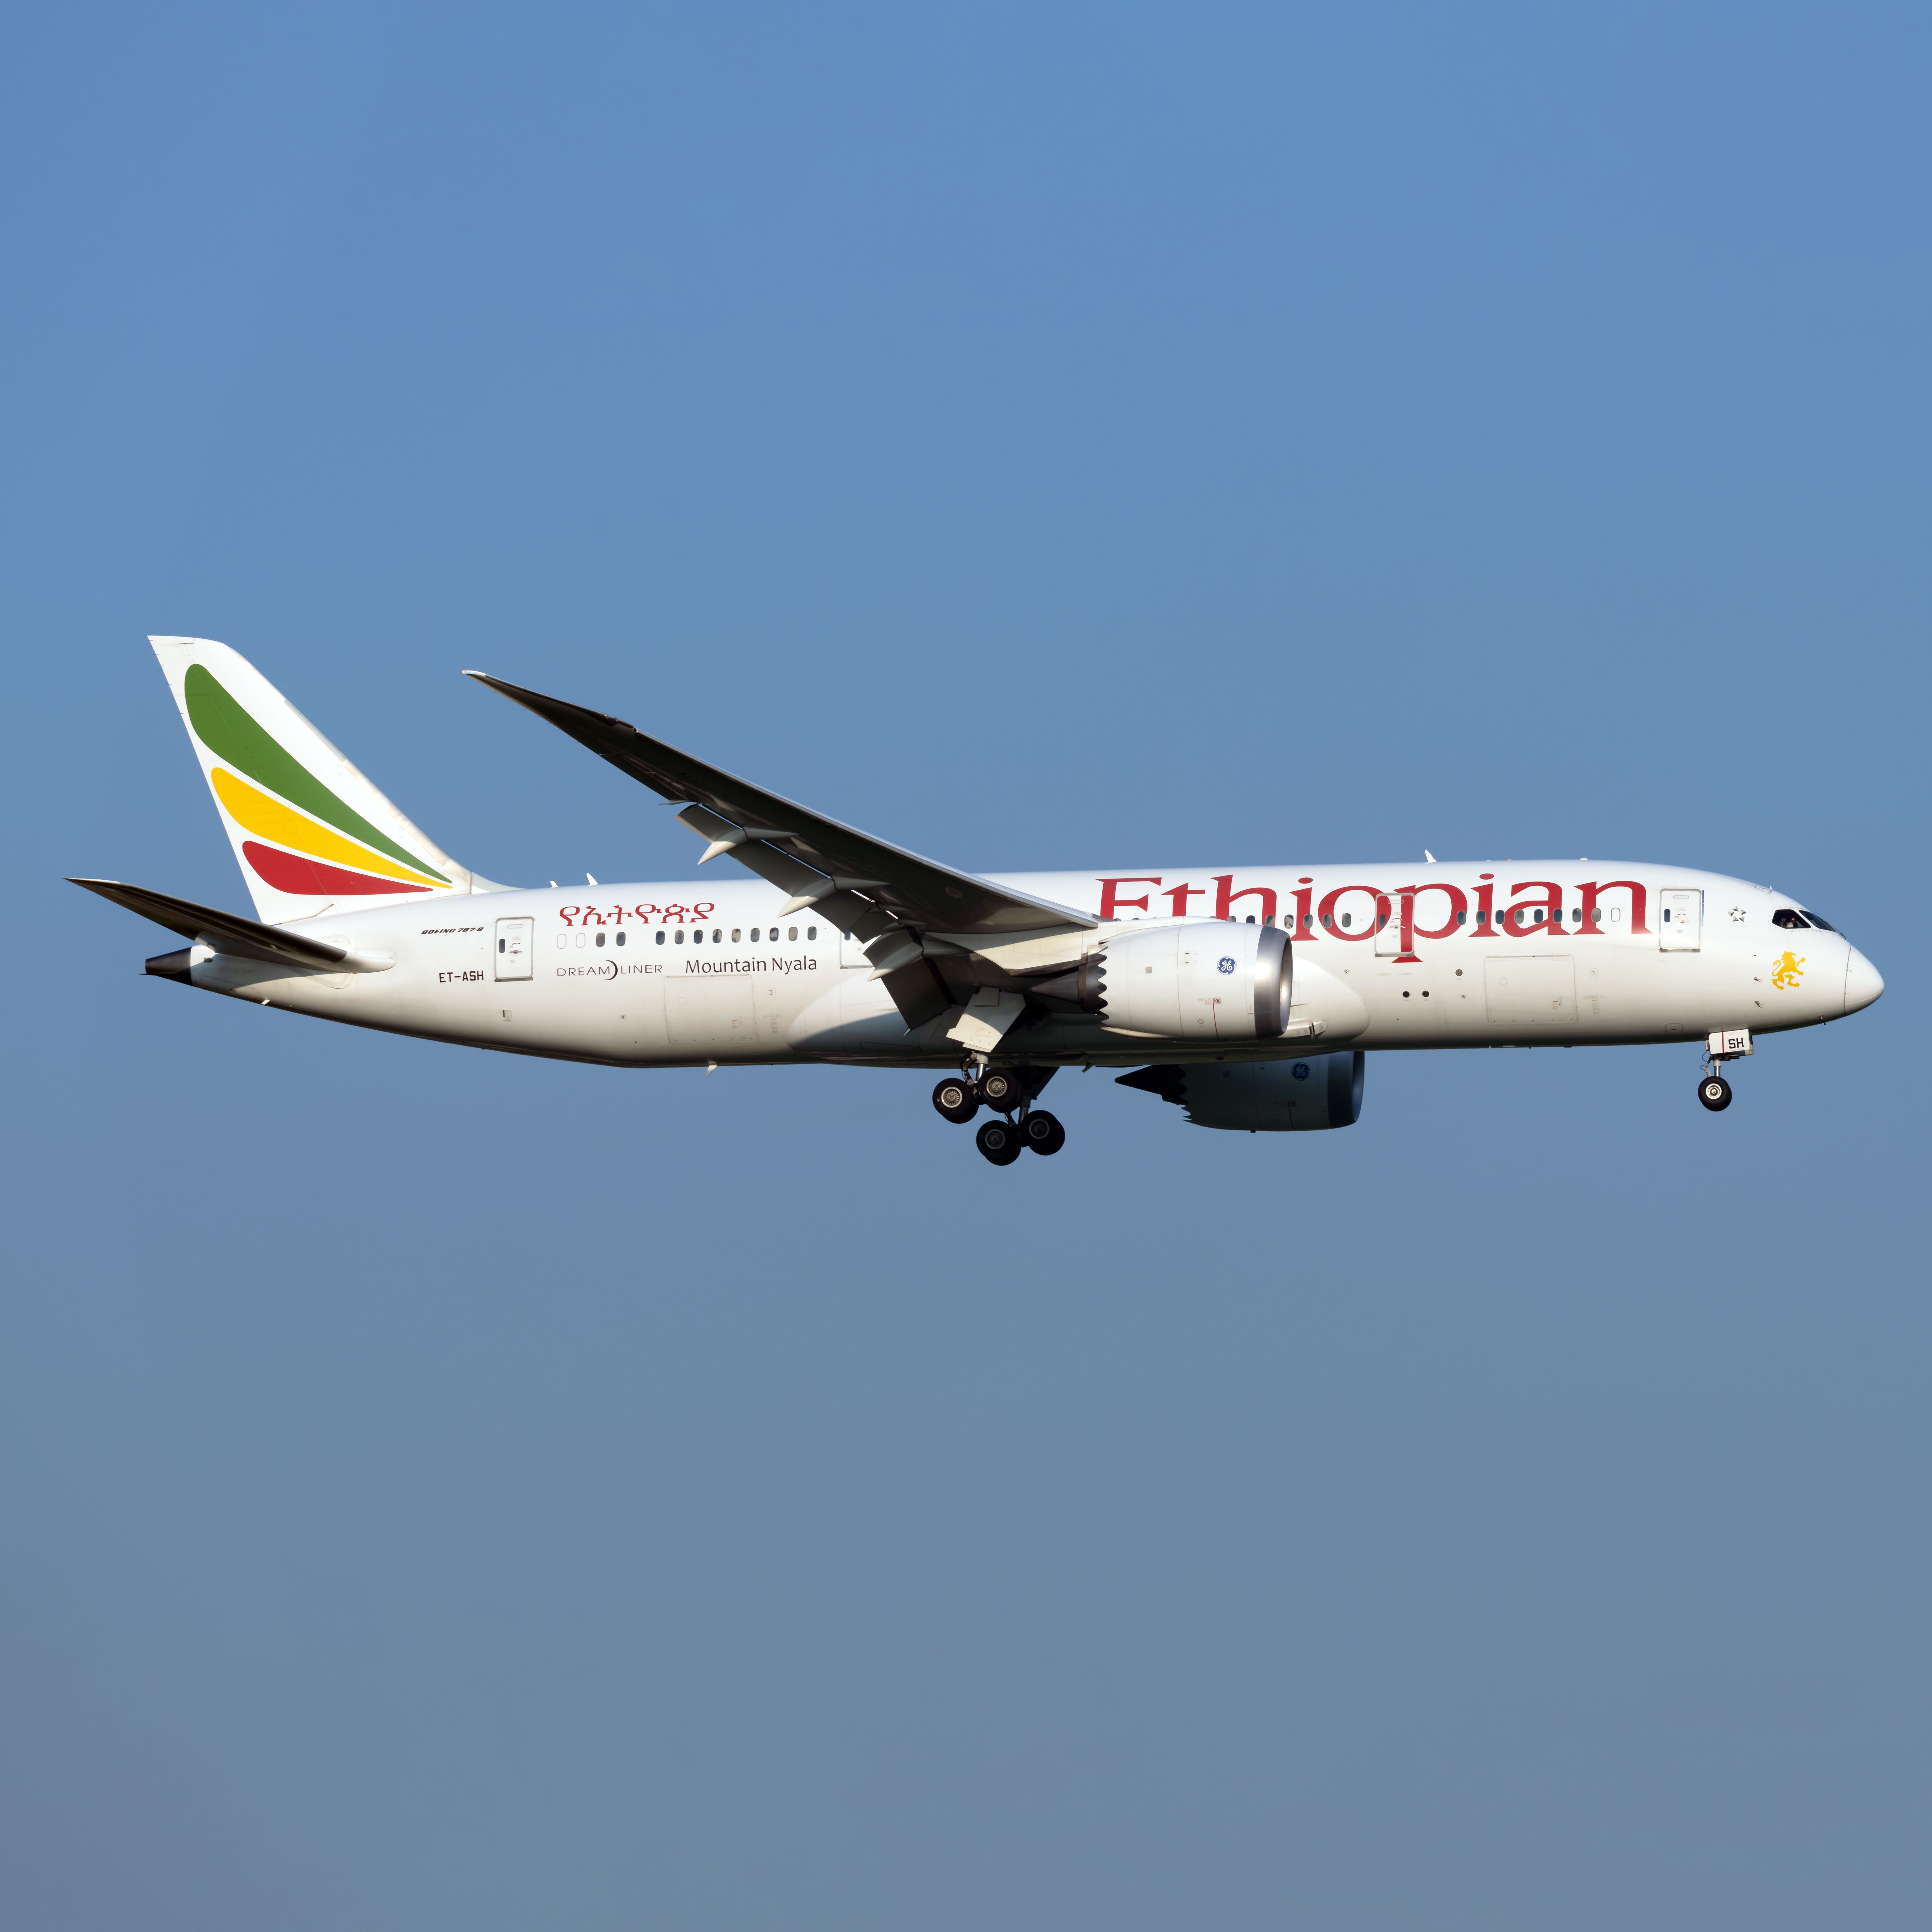 Ethiopan Airlines Boeing 787-8 Dreamliner on approach.